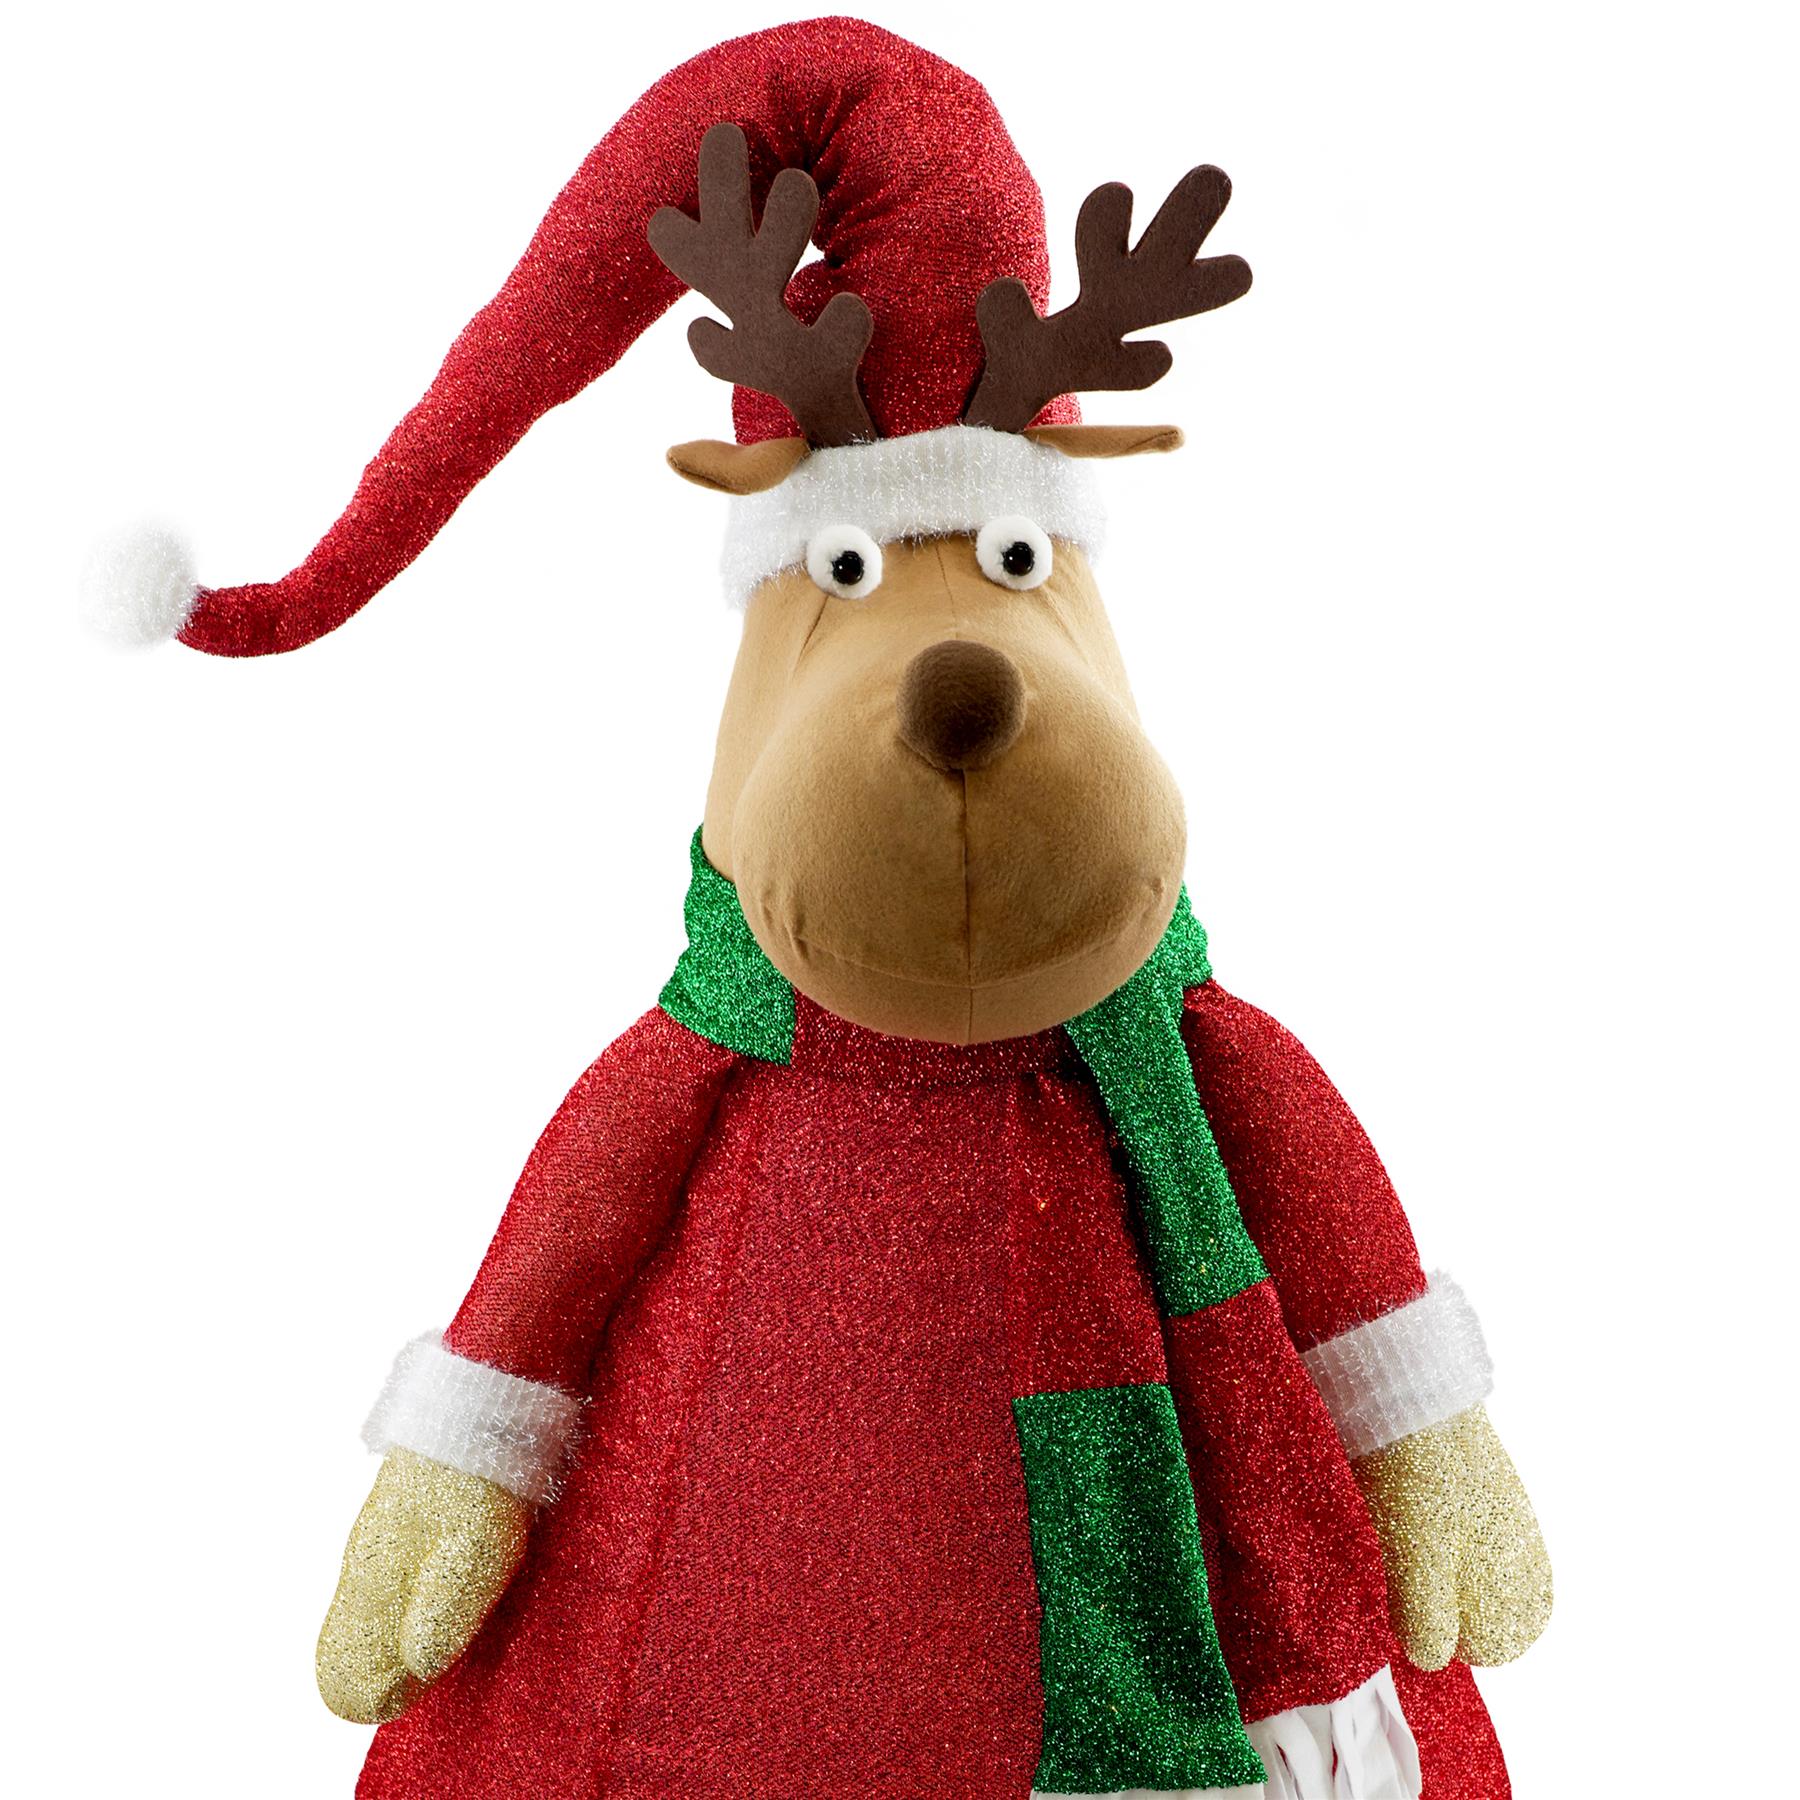 Collapsible Raindeer Christmas Decoration with LED lights by Tha Magic Toy Shop - UKBuyZone